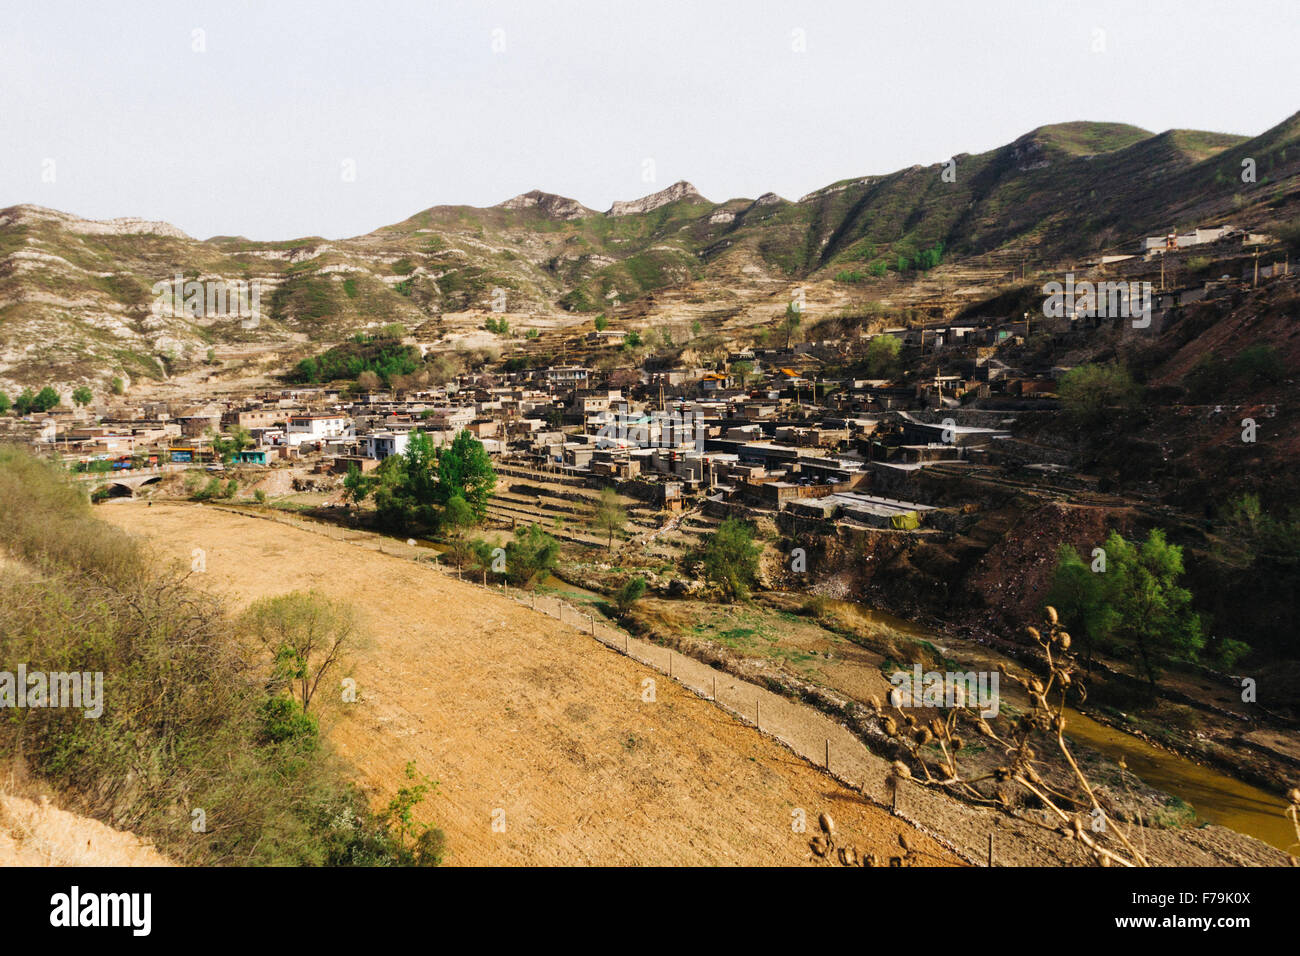 Shanxi Province, China - May, 2013: Chinese poor countryside view in Taihang mountains Stock Photo